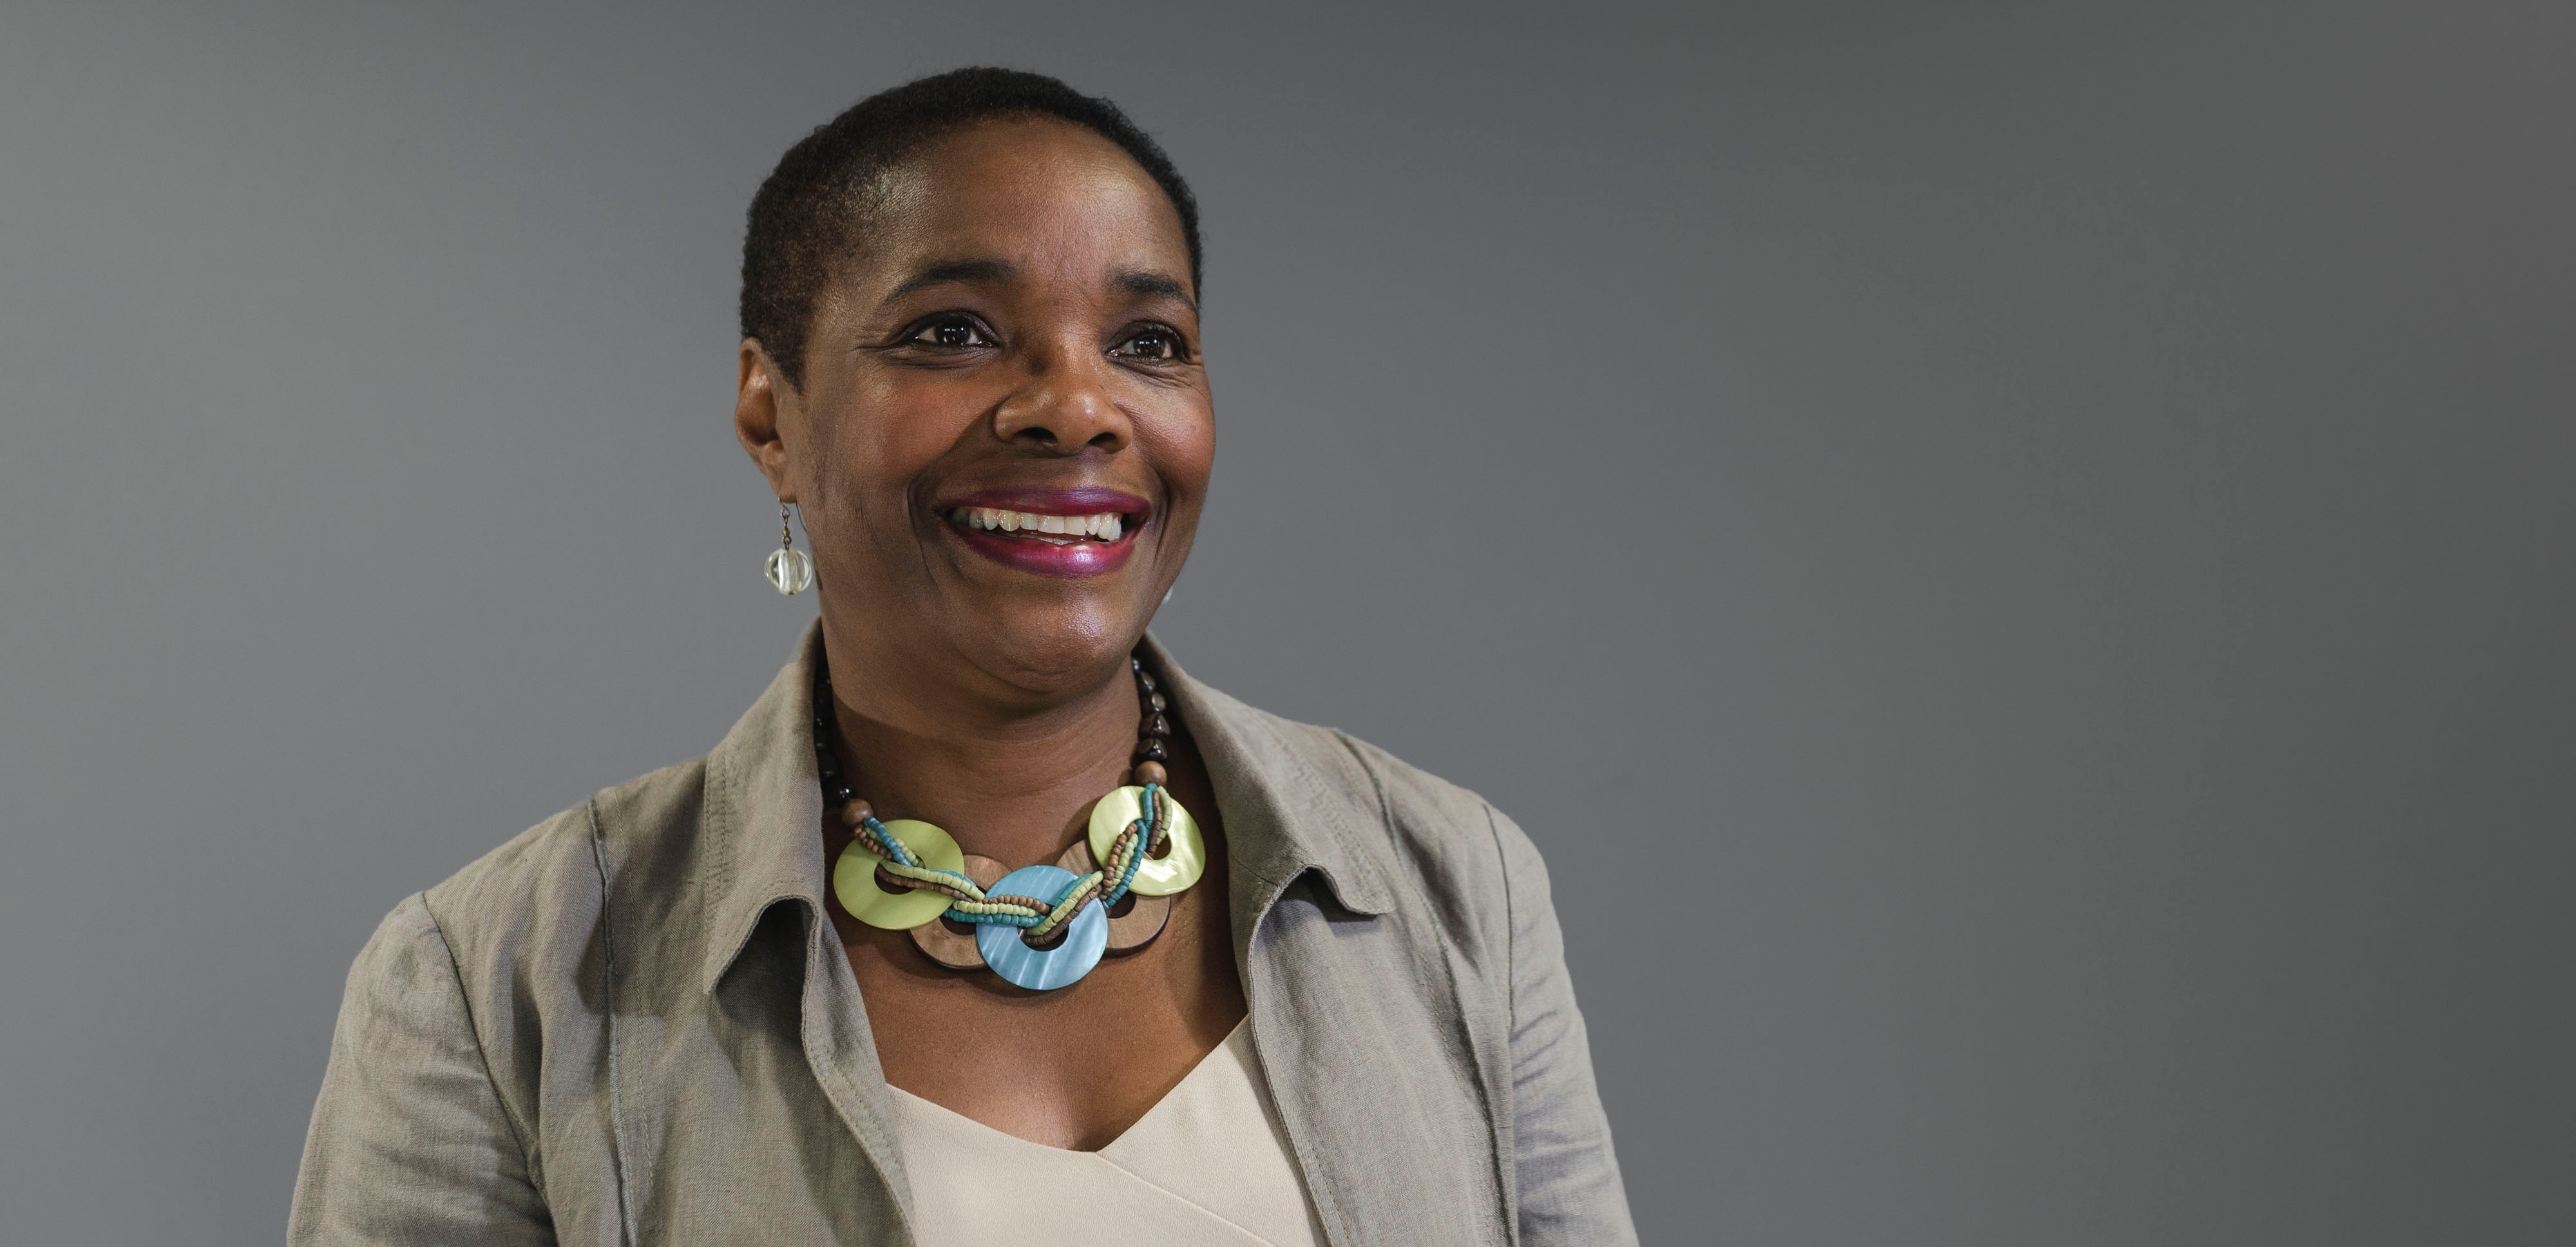 Professor Laura Serrant OBE was named as one of the UK’s most influential black people in the UK 2020 Powerlist